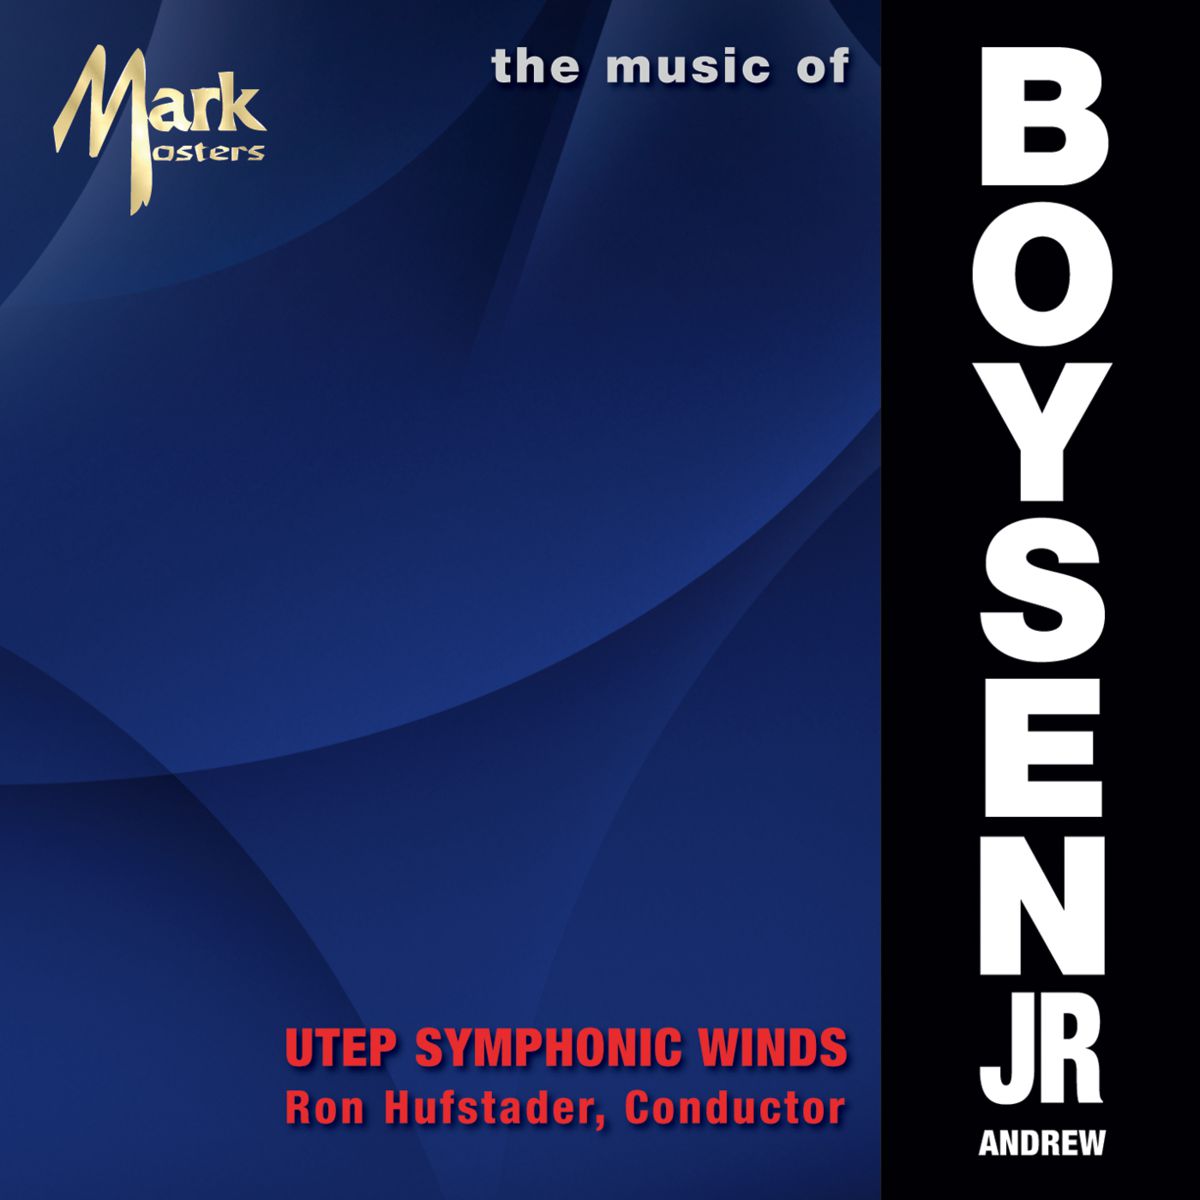 Music of Andrew Boysen Jr., The - cliquer ici